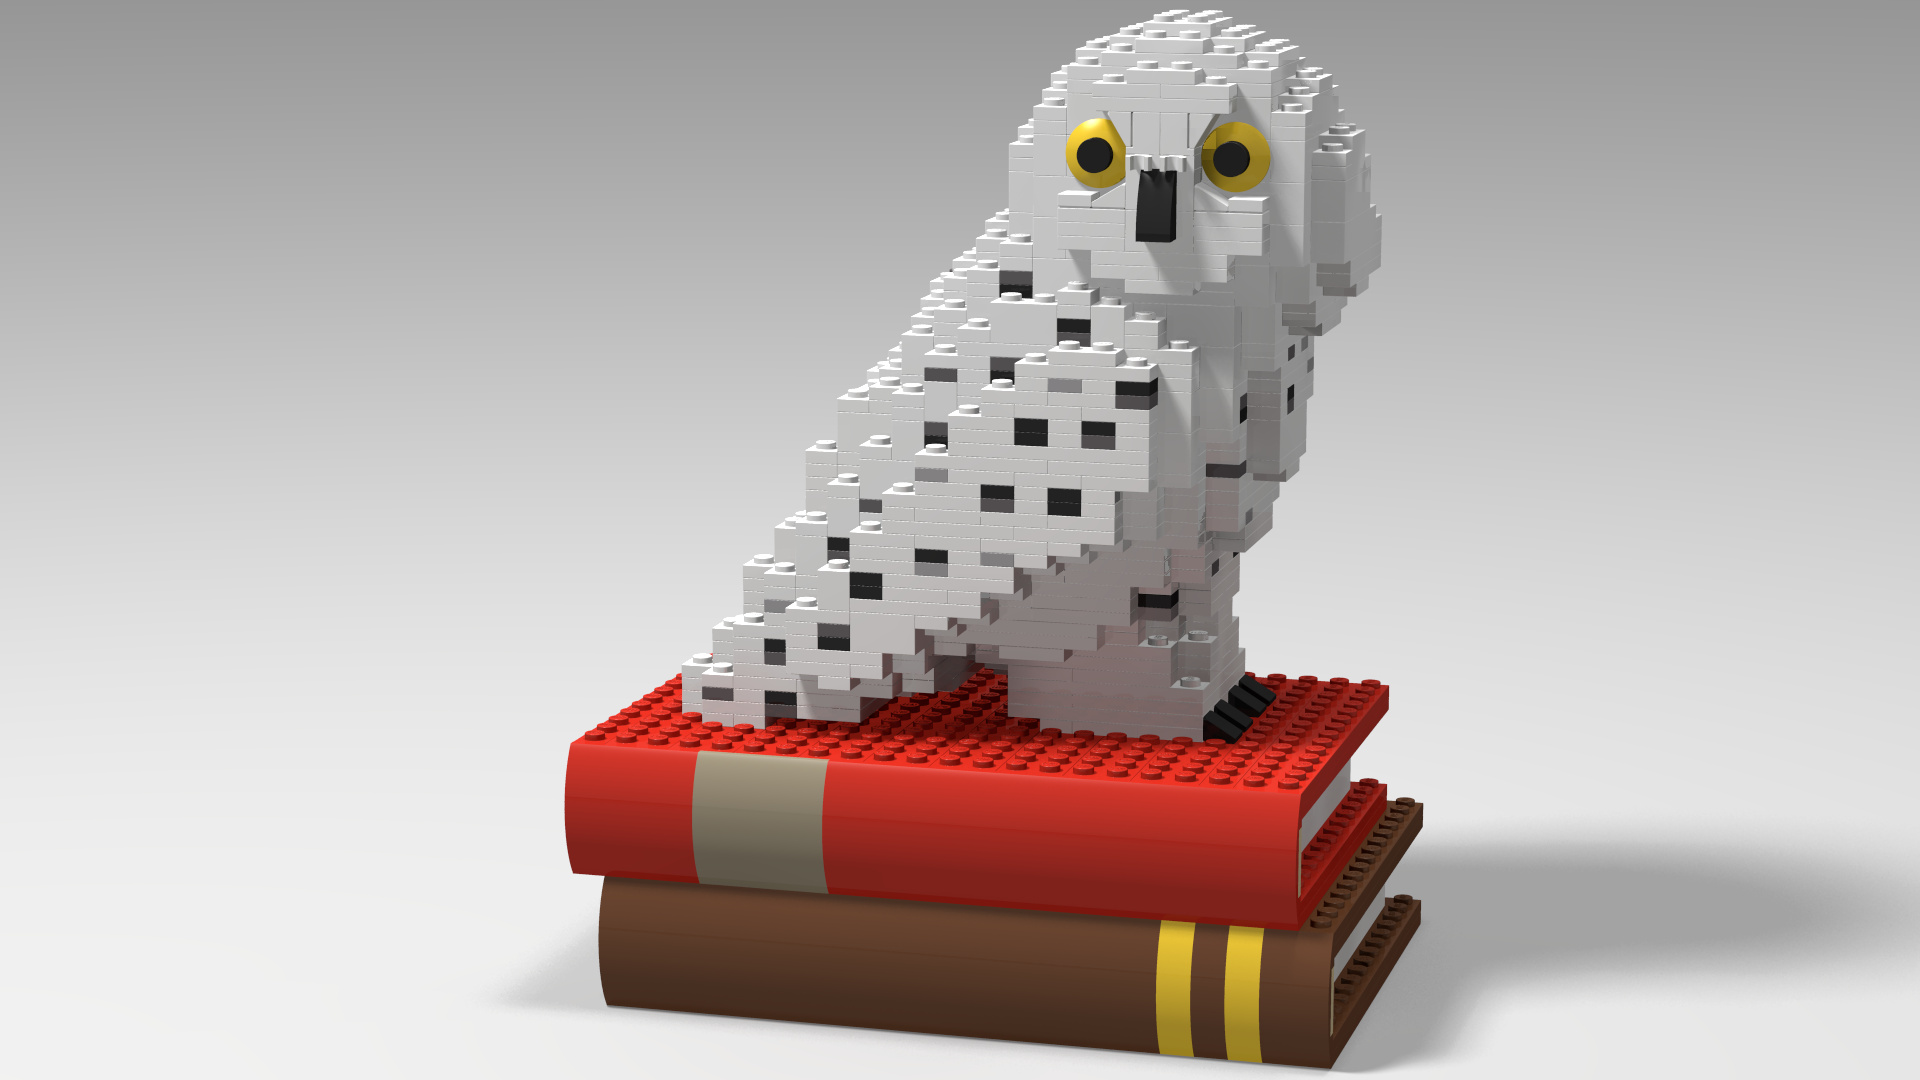 Hedwig: Was attacked by associates of Dolores Umbridge in an effort to intercept Harry's mail. 1920x1080 Full HD Wallpaper.